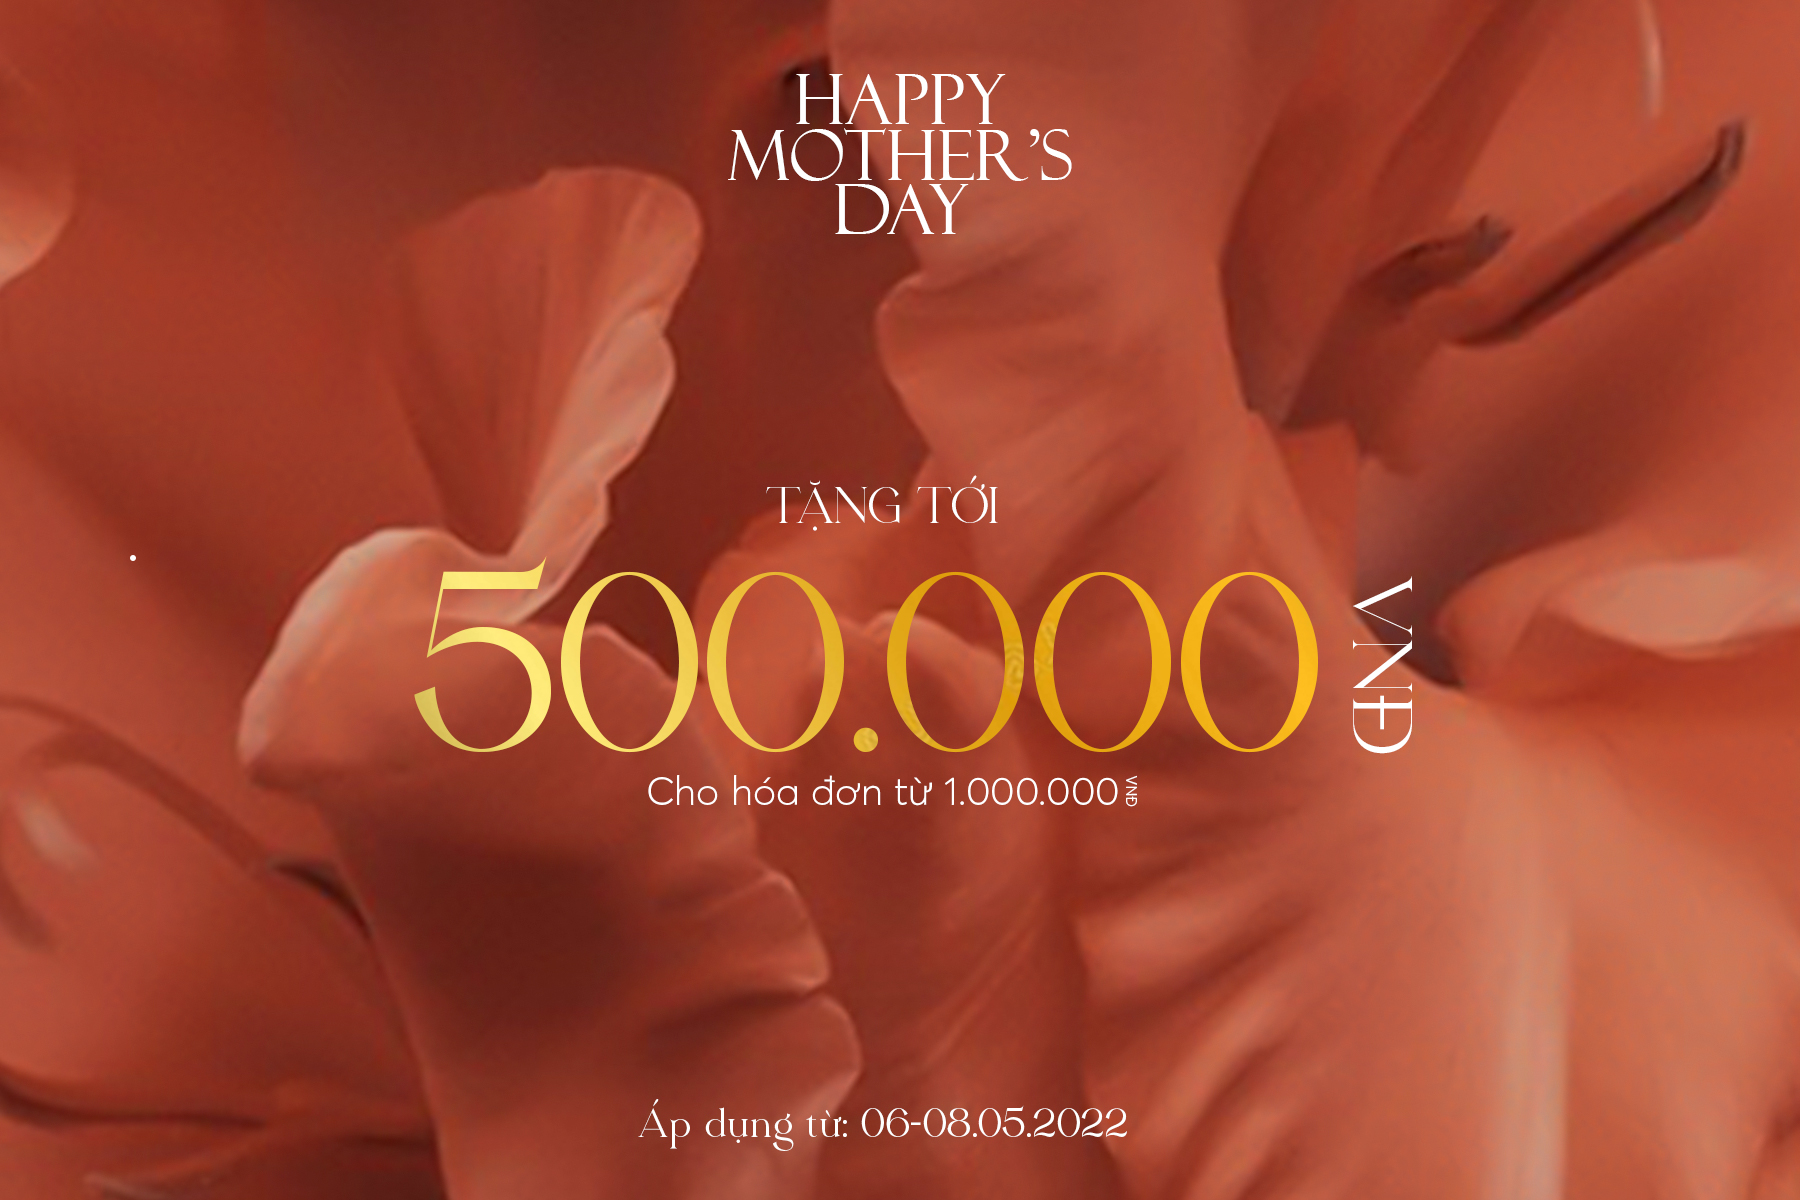 happy-mothers-day-mung-ngay-cua-me-8508330